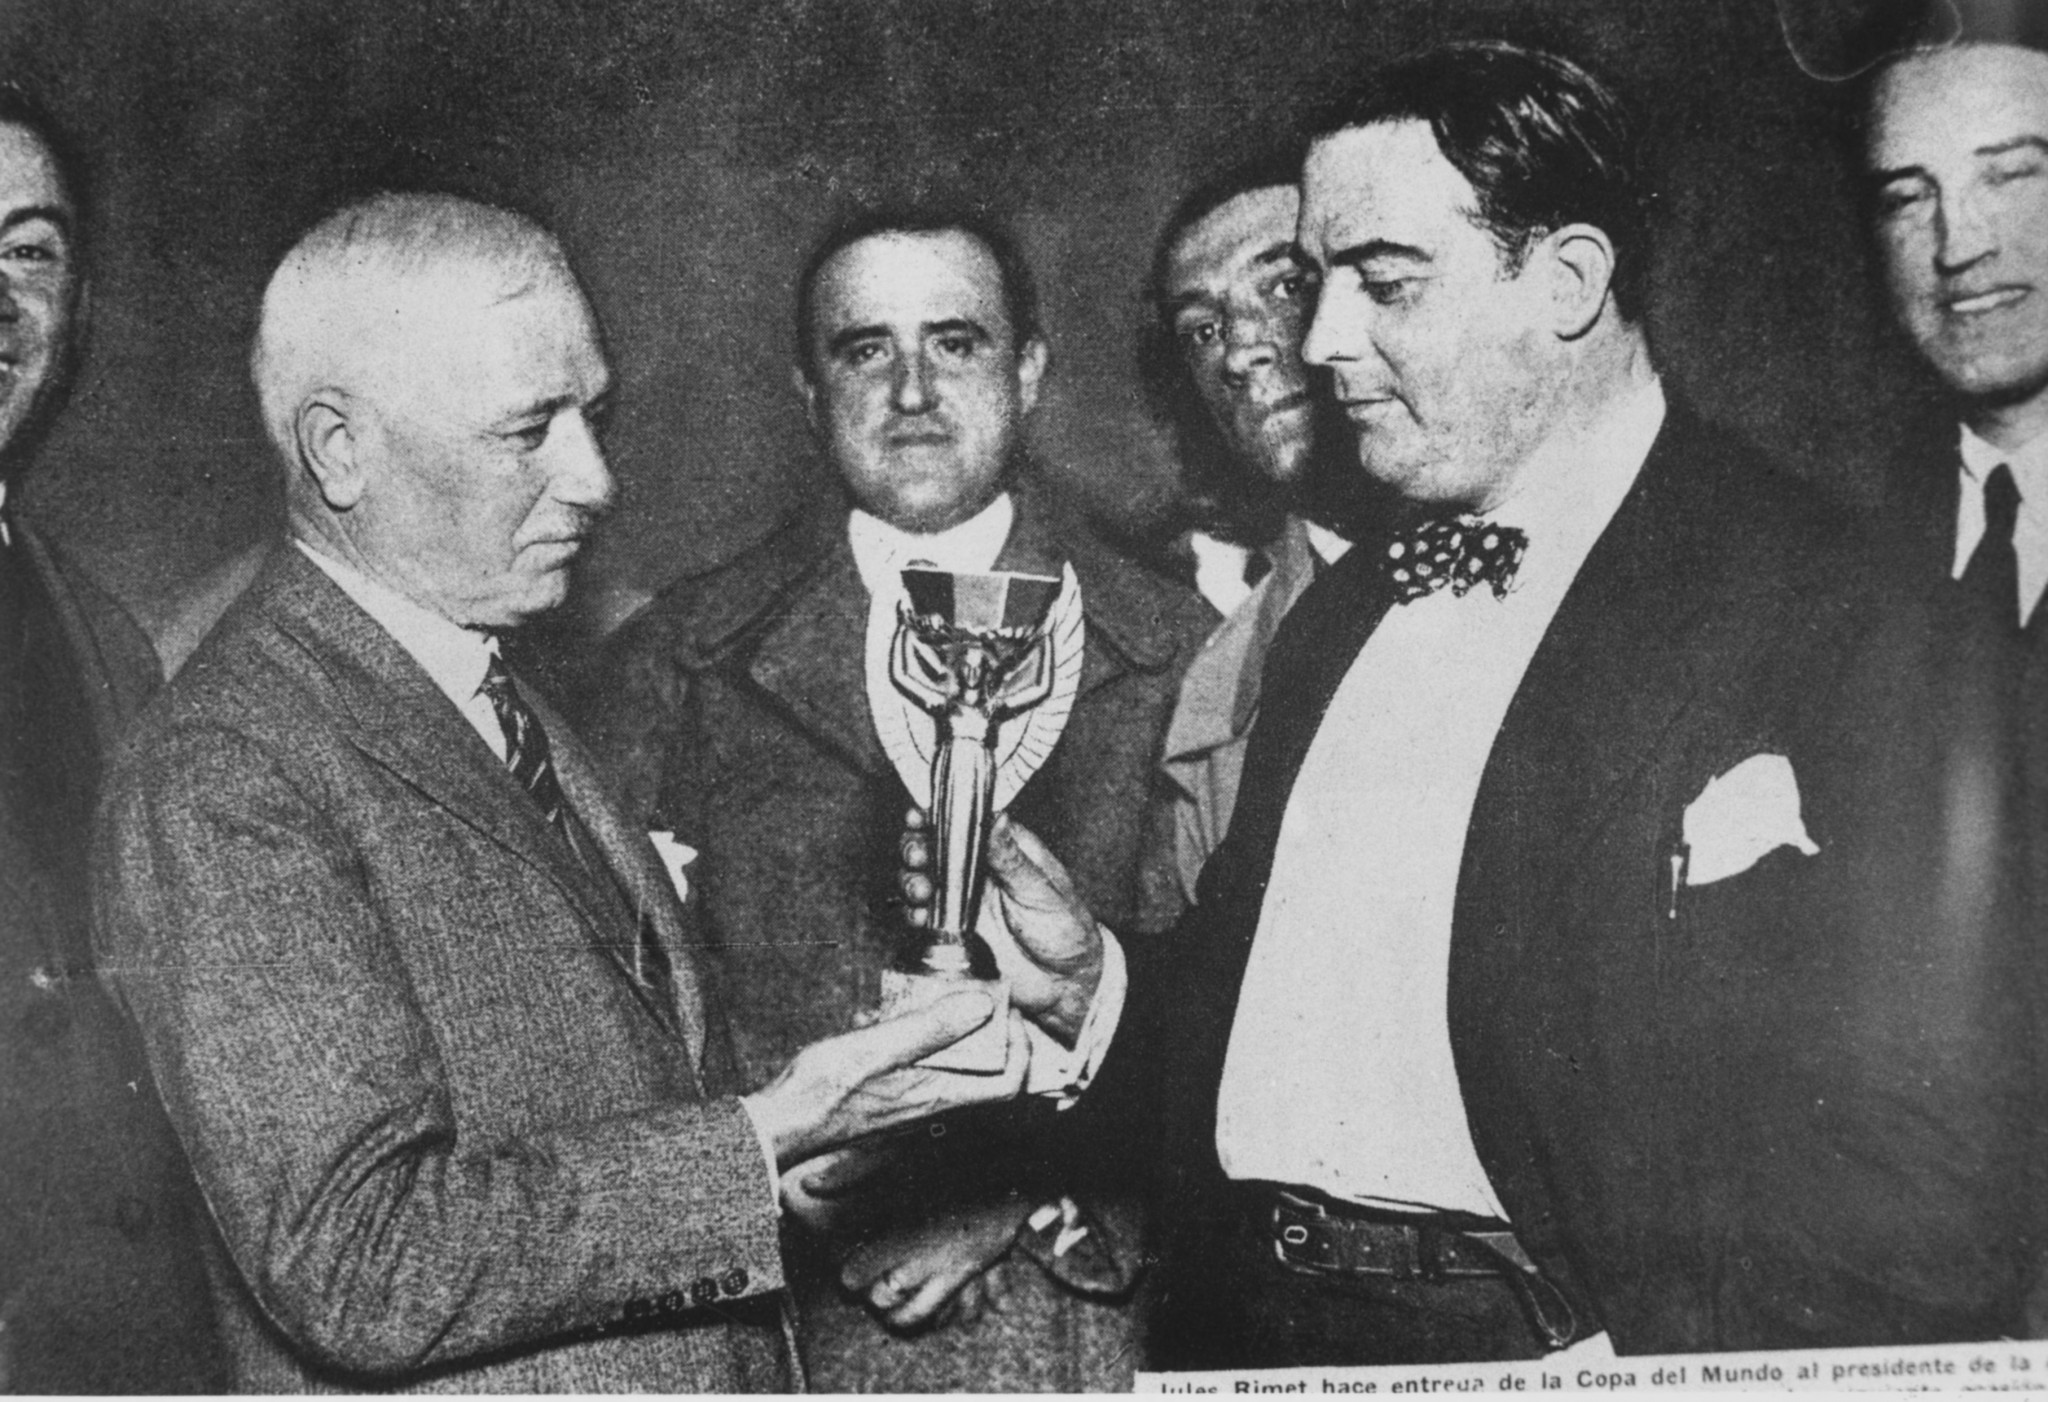 Jules Rimet, FIFA President, presents the 1930 trophy to Dr Paul Jude, the President of the Uruguayan Football Association - a key year in the history of the game ©Getty Images